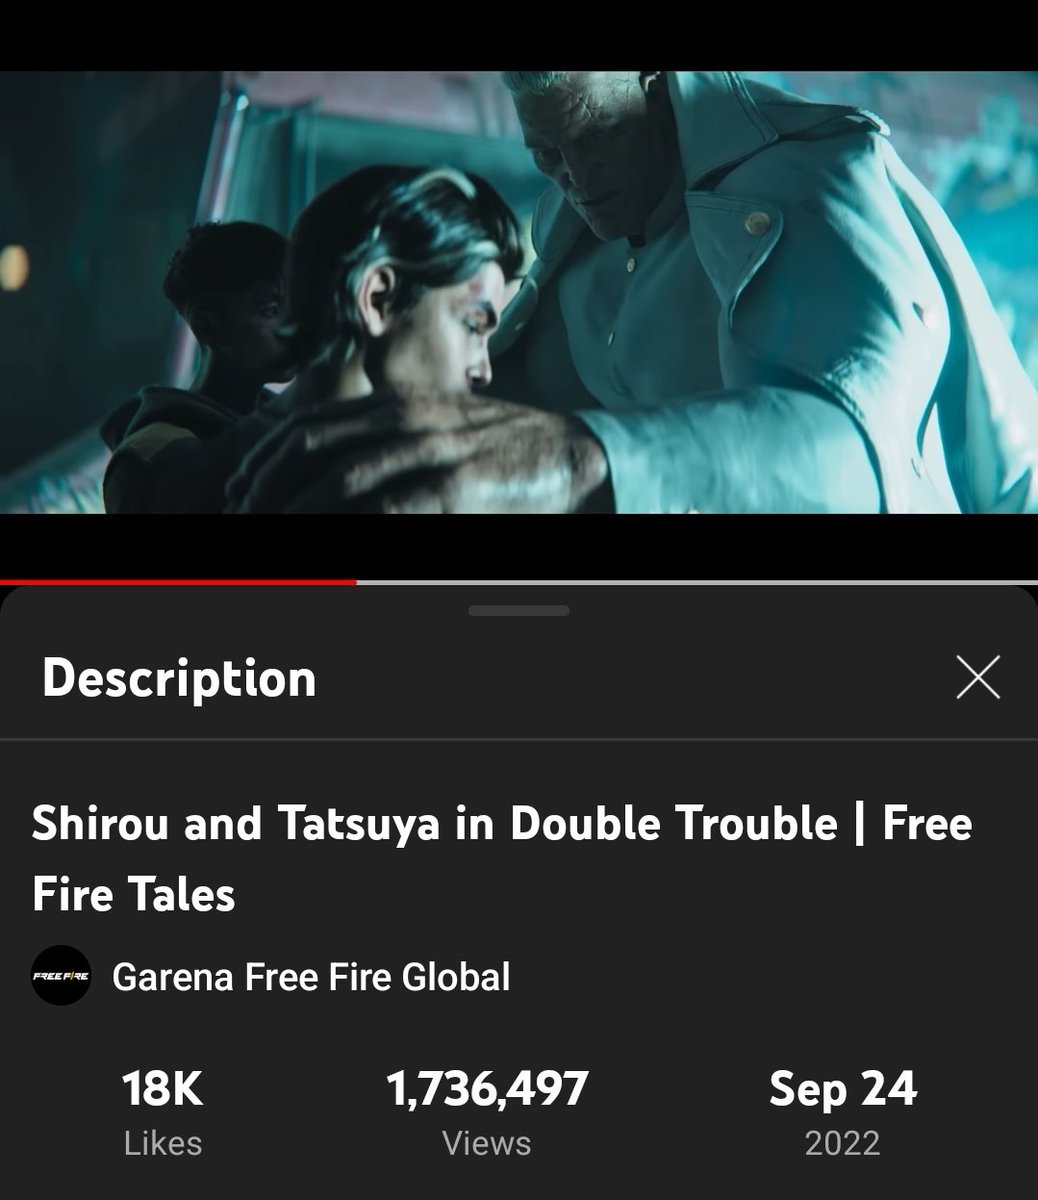 1.7M views in a week of our short #freefiretales Double Trouble! Thank you #freefireuniverse fans for showing up and the @FreeFire_NA team for having me on as Mr. Mark